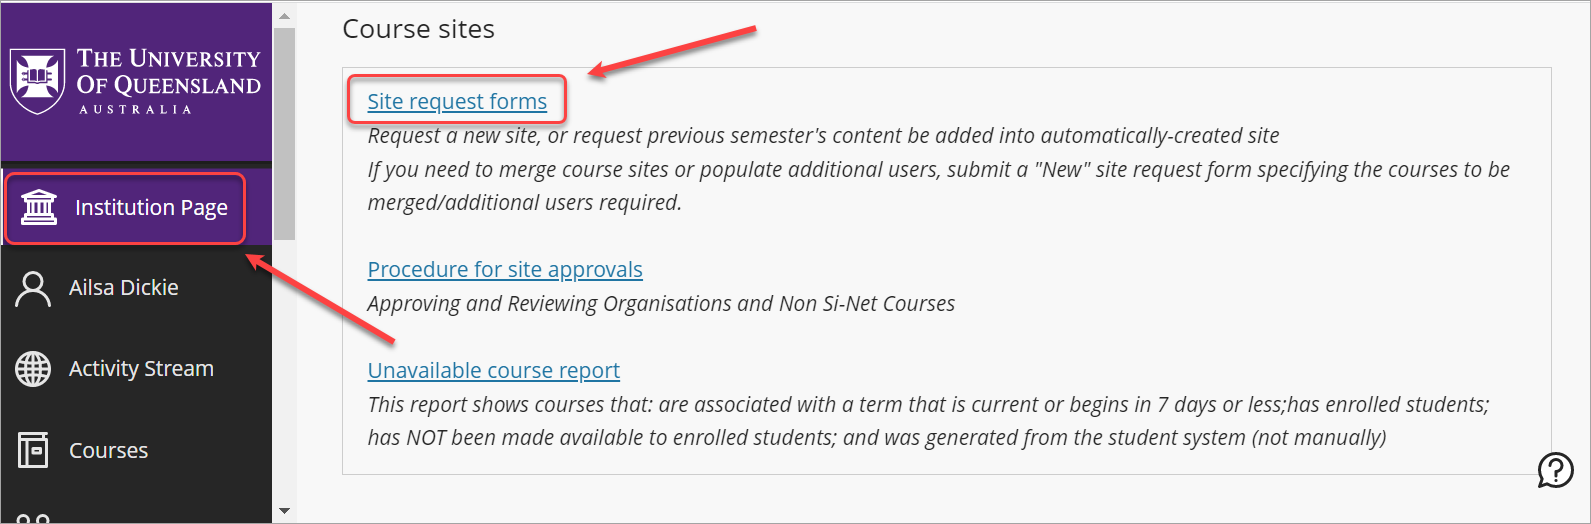 Institution page and site request forms circled